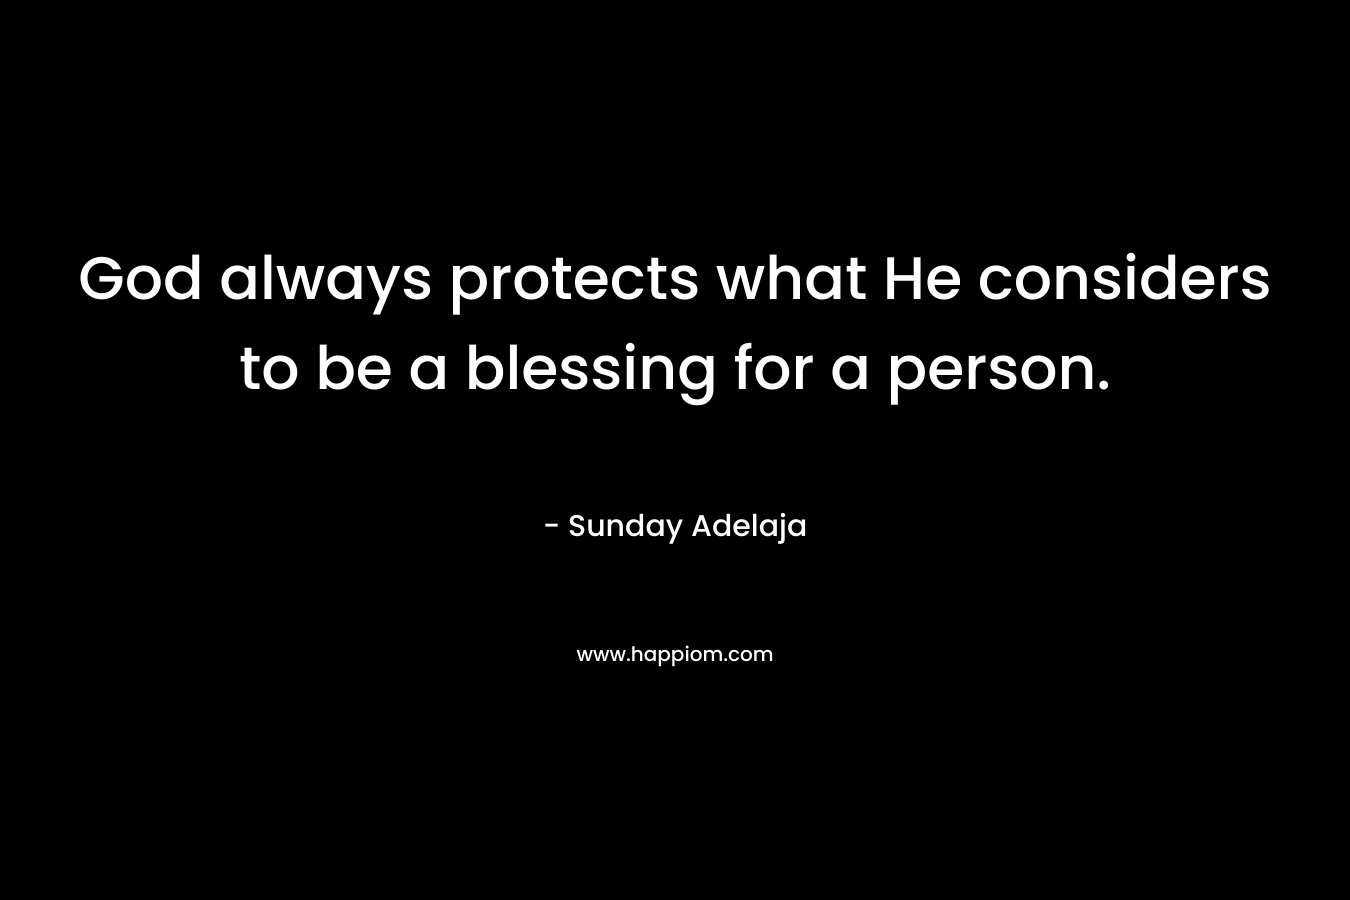 God always protects what He considers to be a blessing for a person.